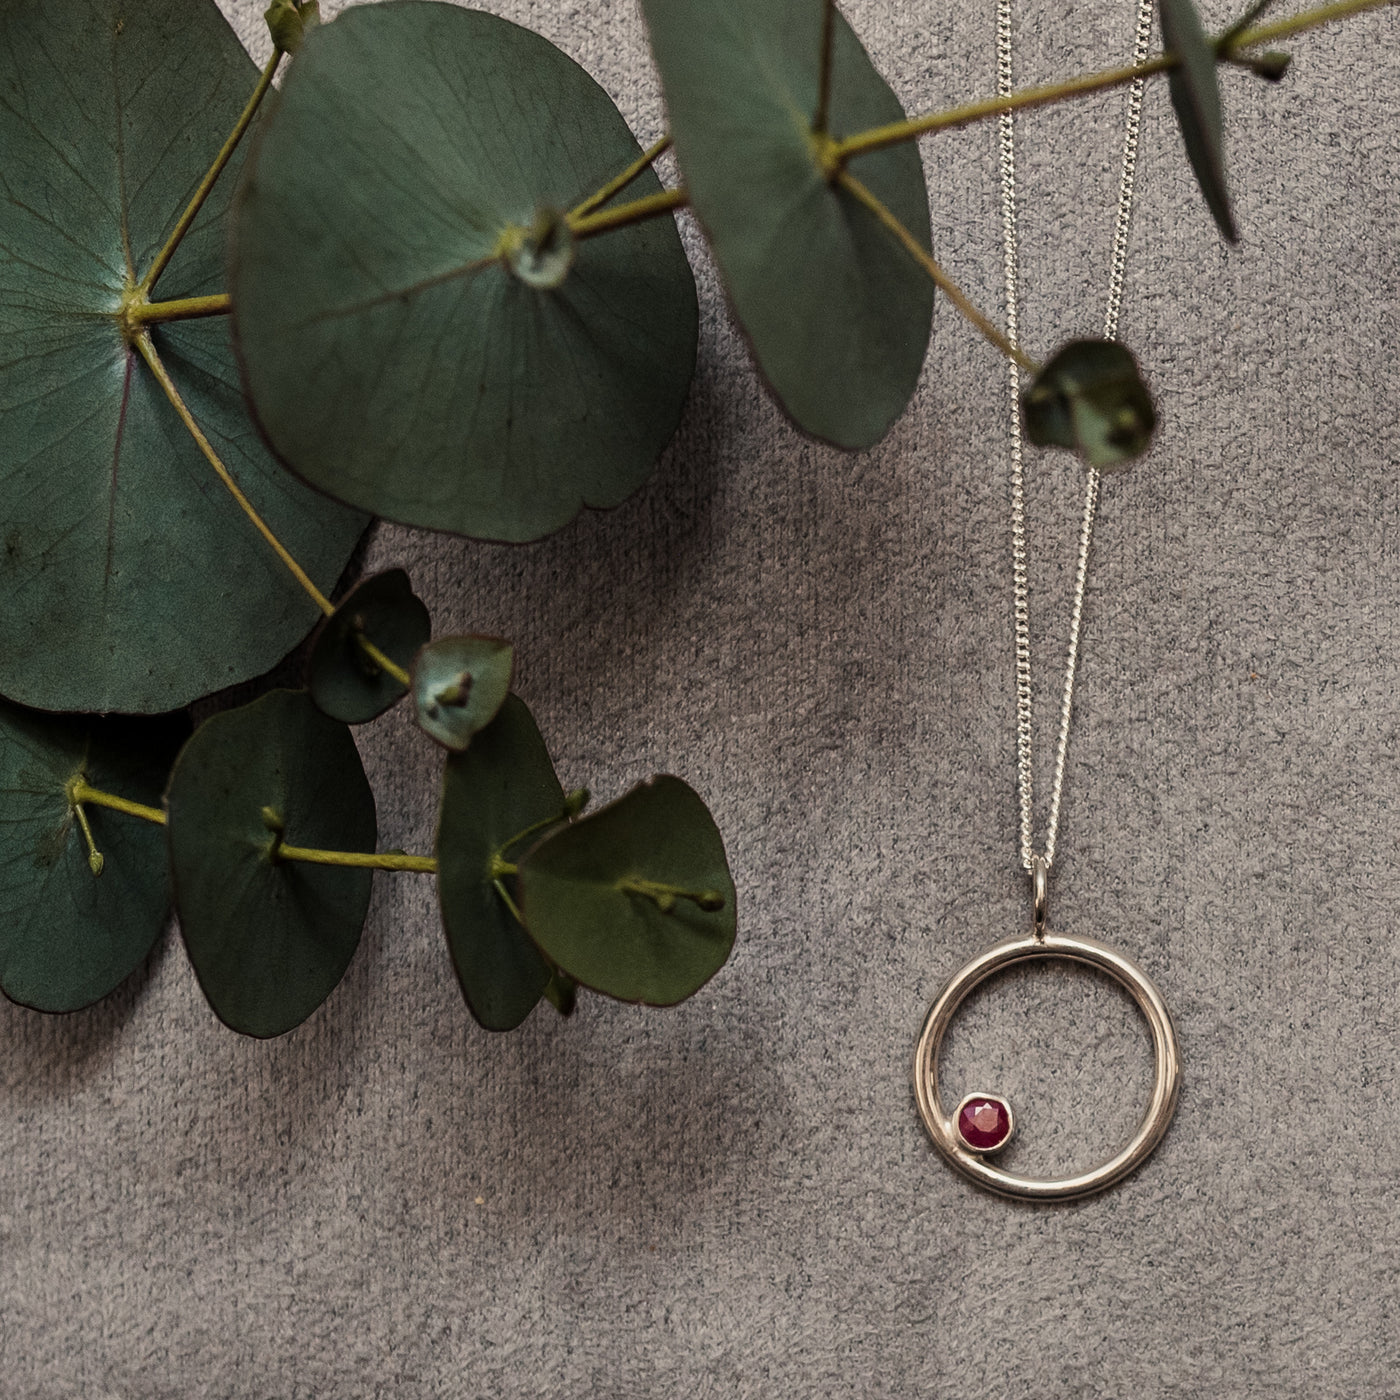 Silver circle pendant with offset bezel set red ruby 4mm round gemstone on a silver chain with a grey velvet background and leaves. Handmade in Corbridge Northumberland